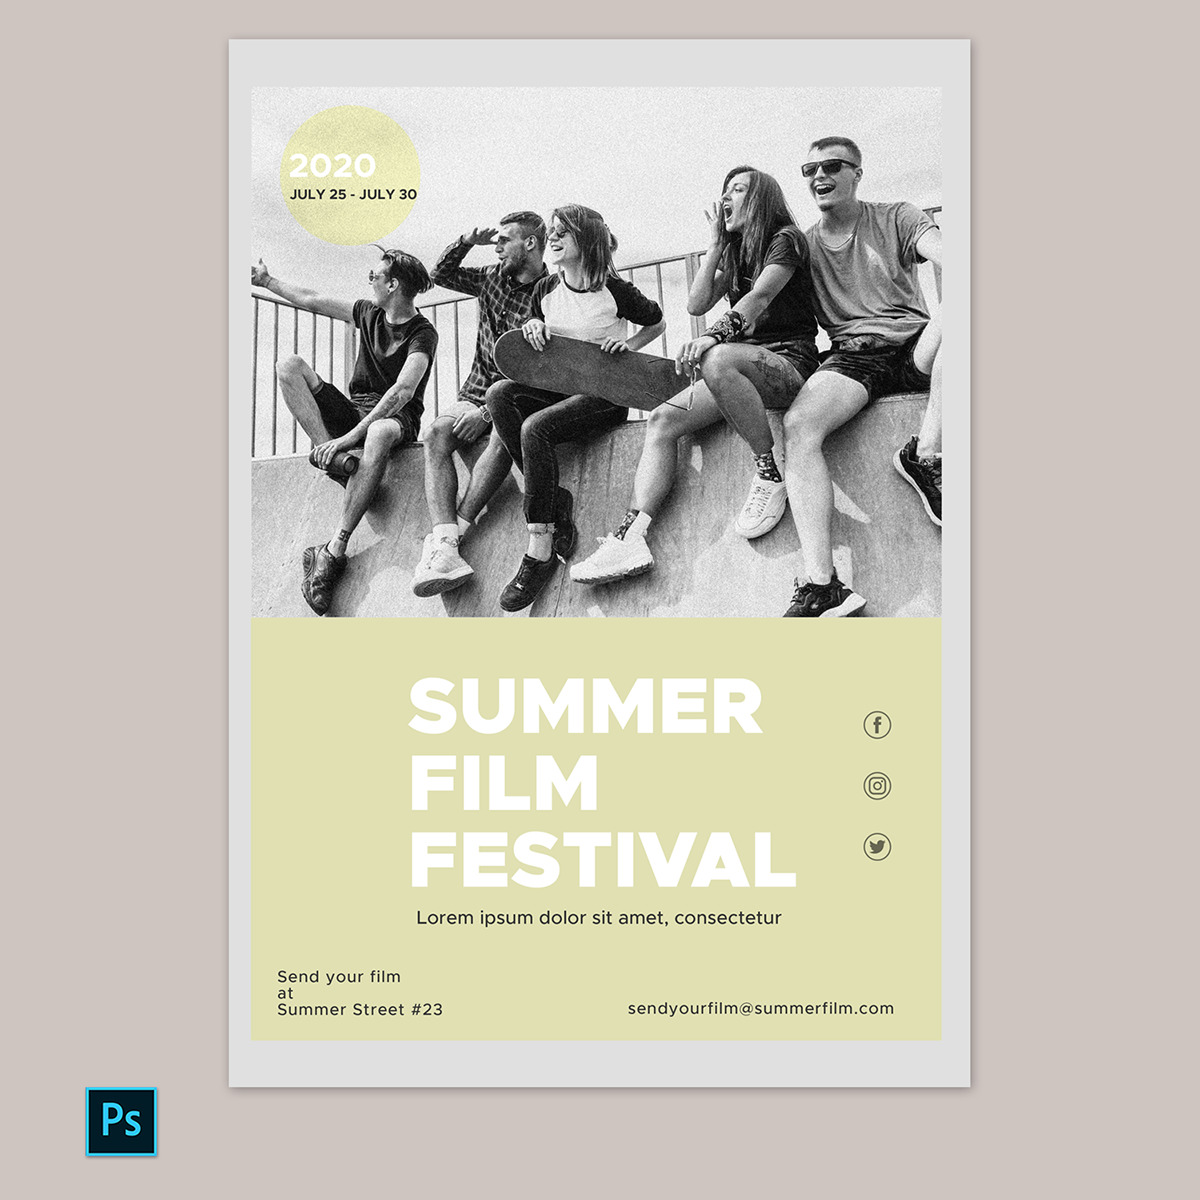 Free Movie Poster Template 04 in Photoshop